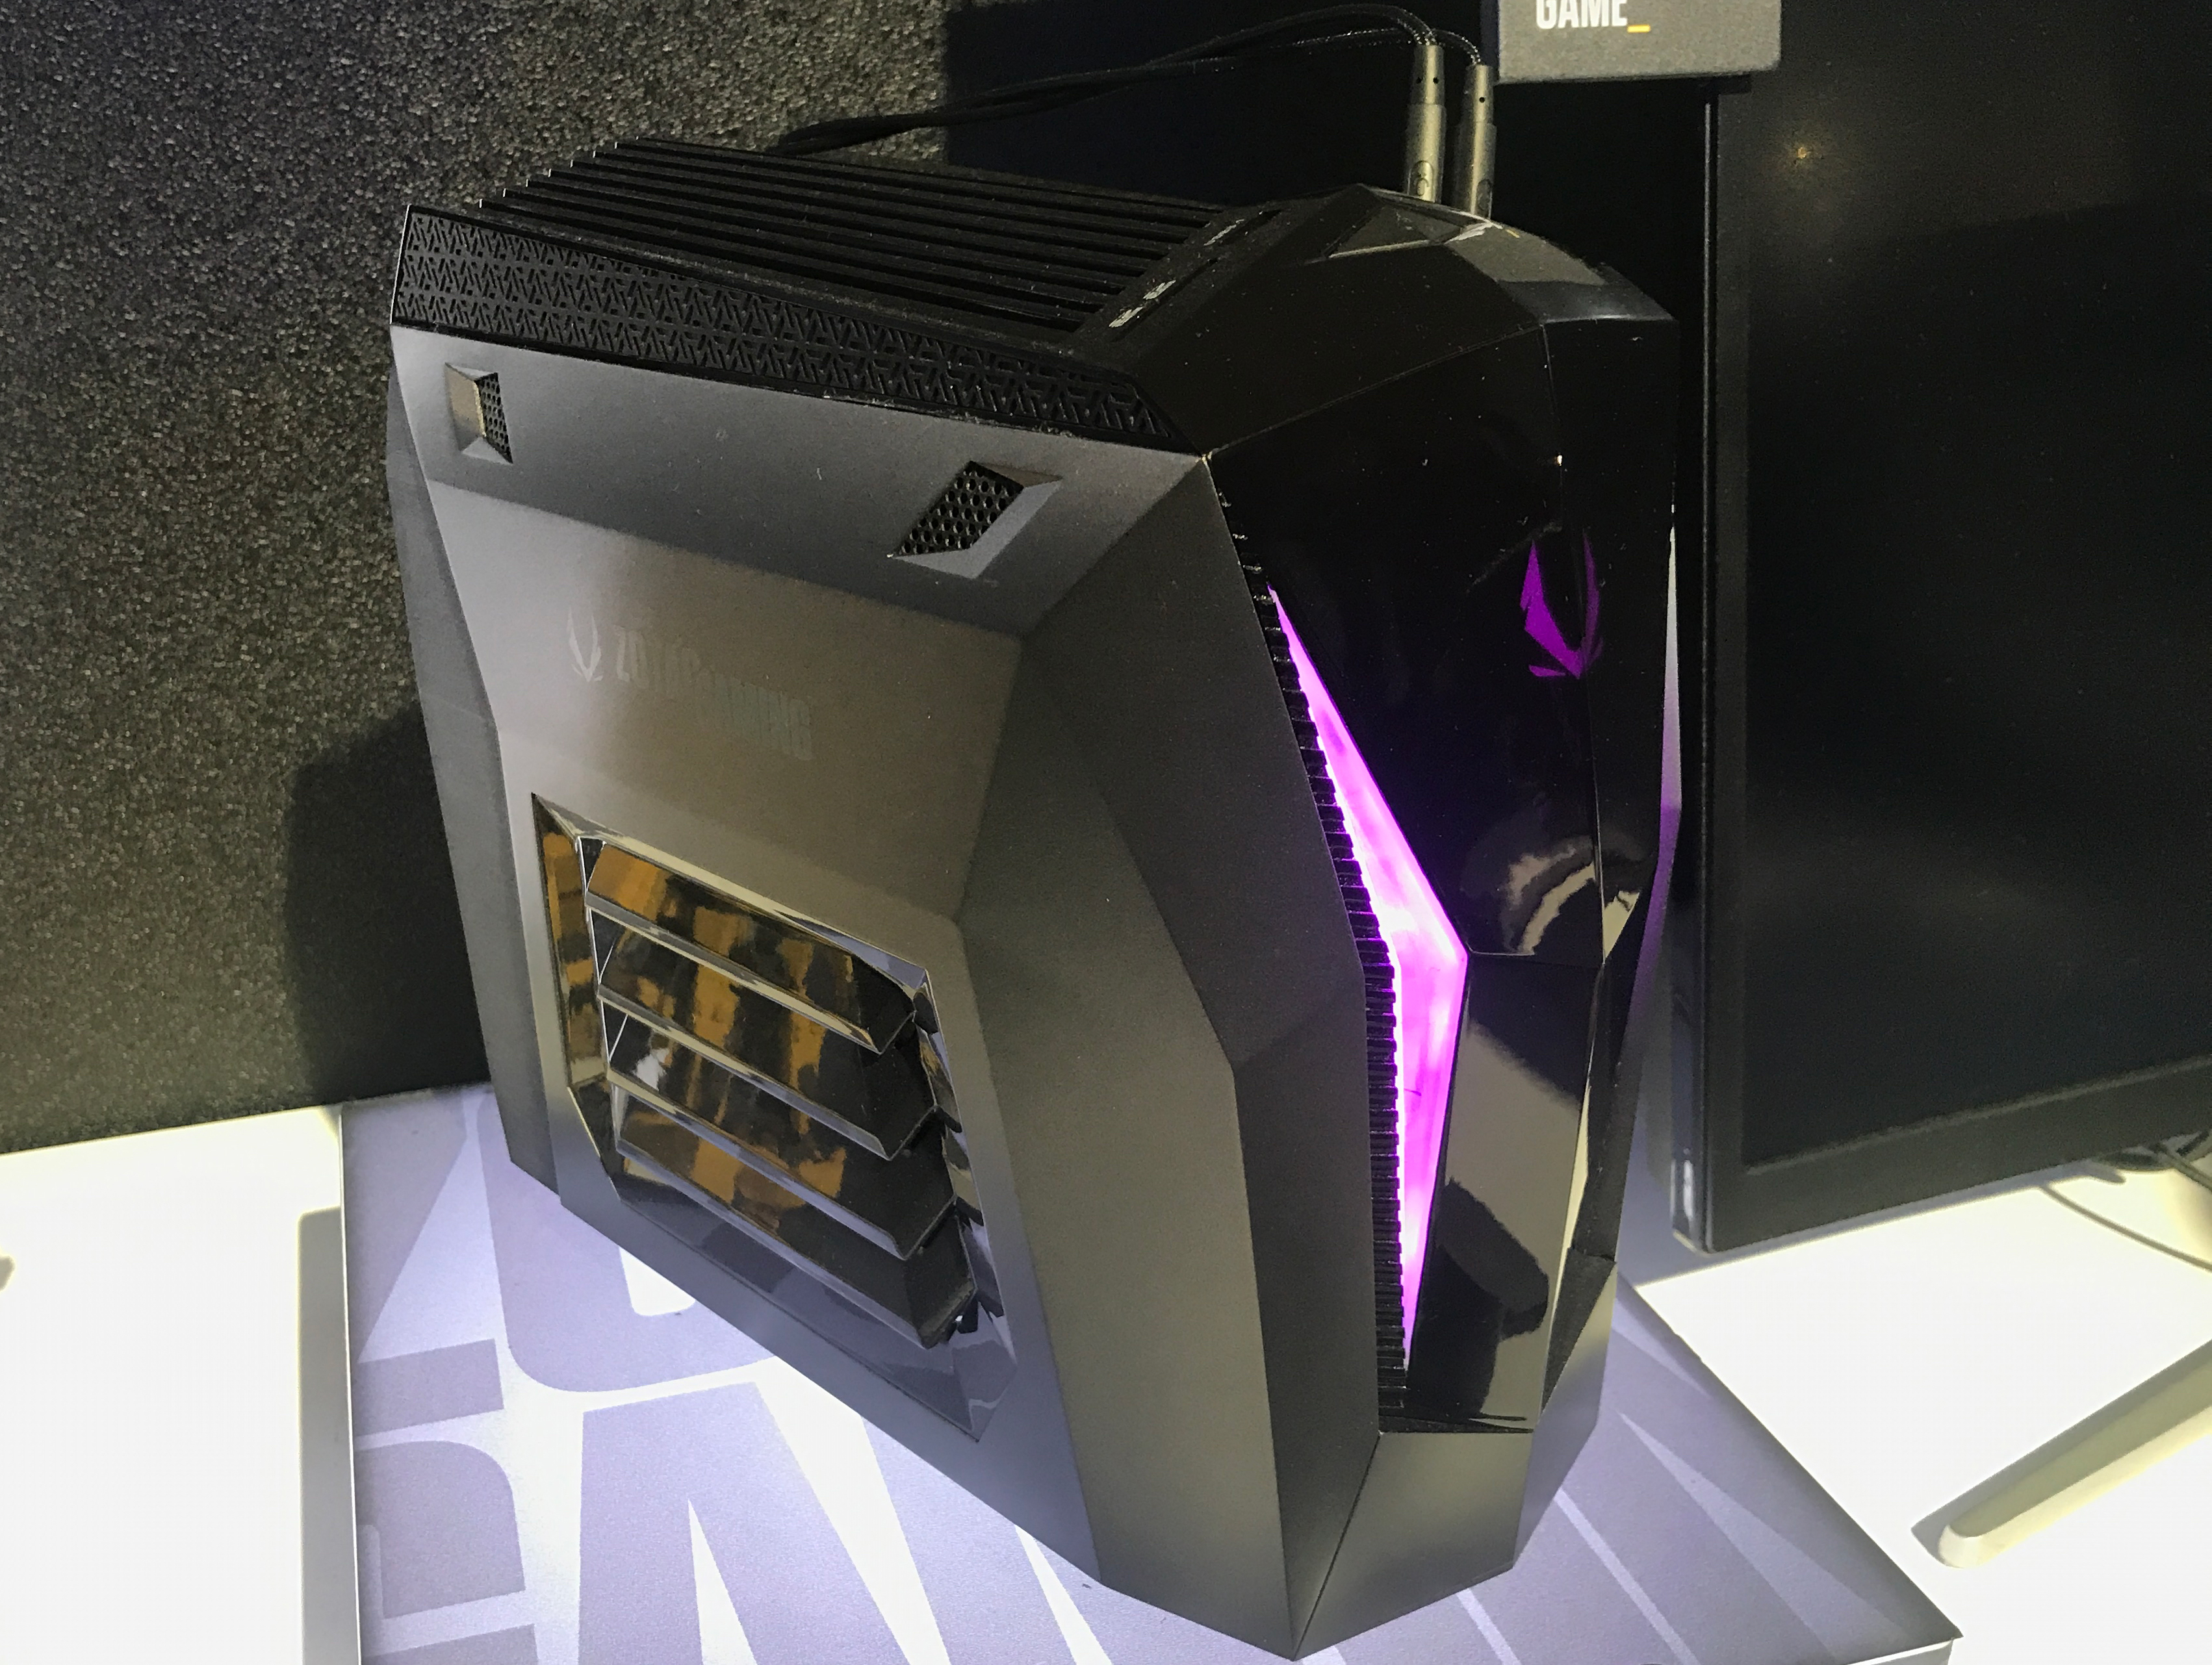 INTRODUCING THE SIZE BREAKING, SMALL AND STRONG MEK MINI GAMING PC